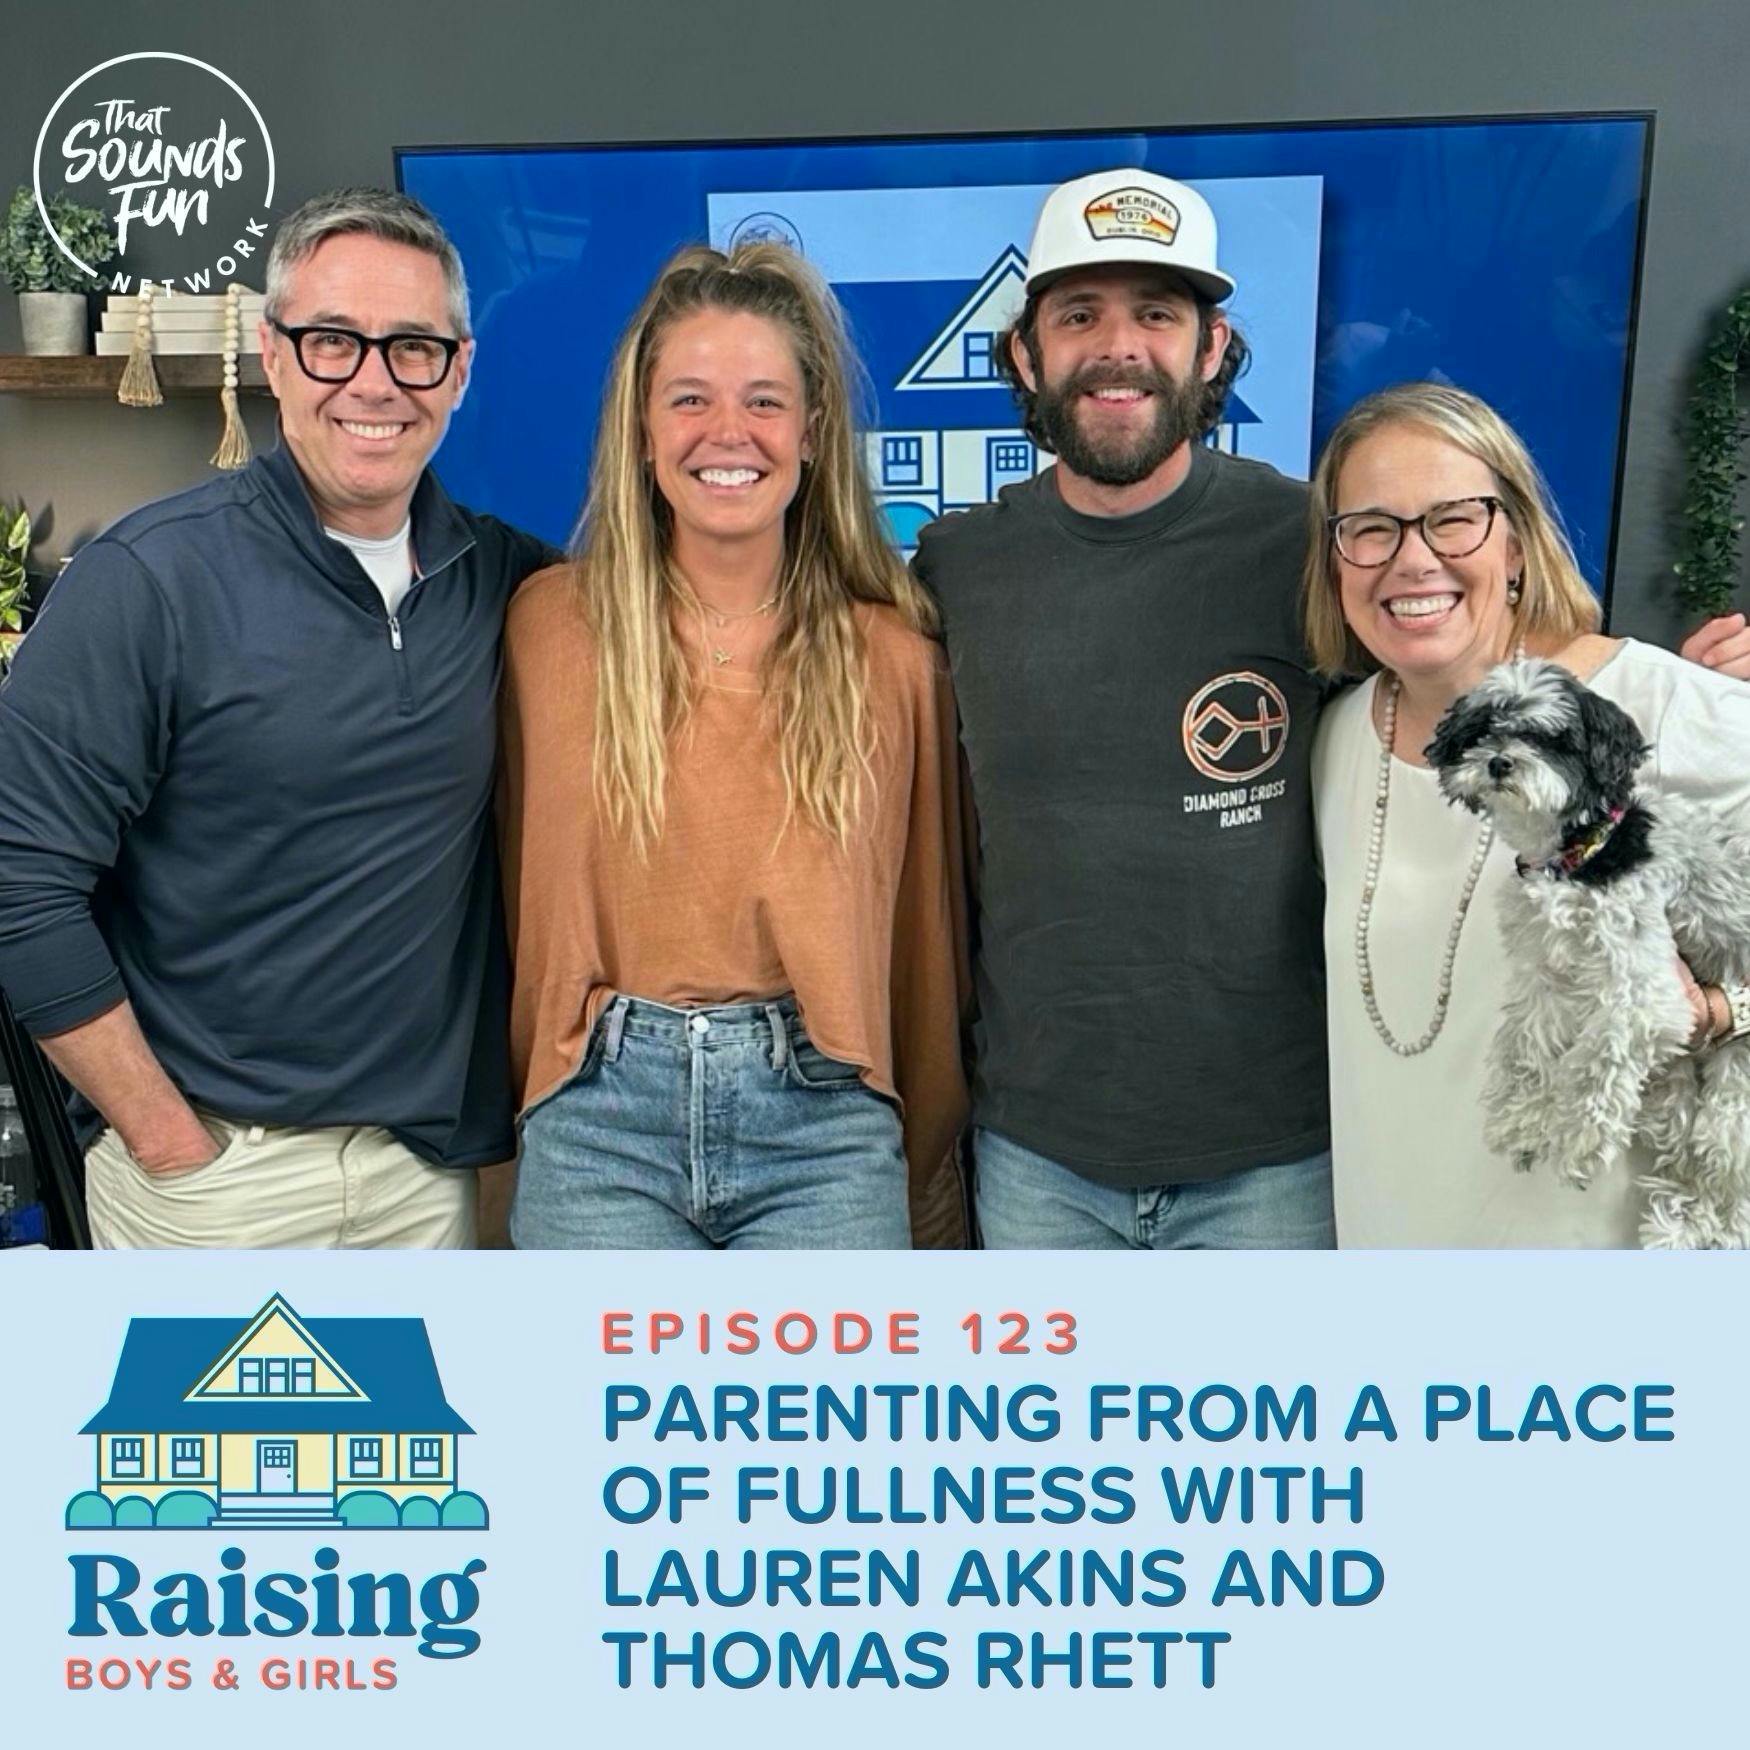 Episode 123: Parenting from a Place of Fullness with Lauren Akins and Thomas Rhett